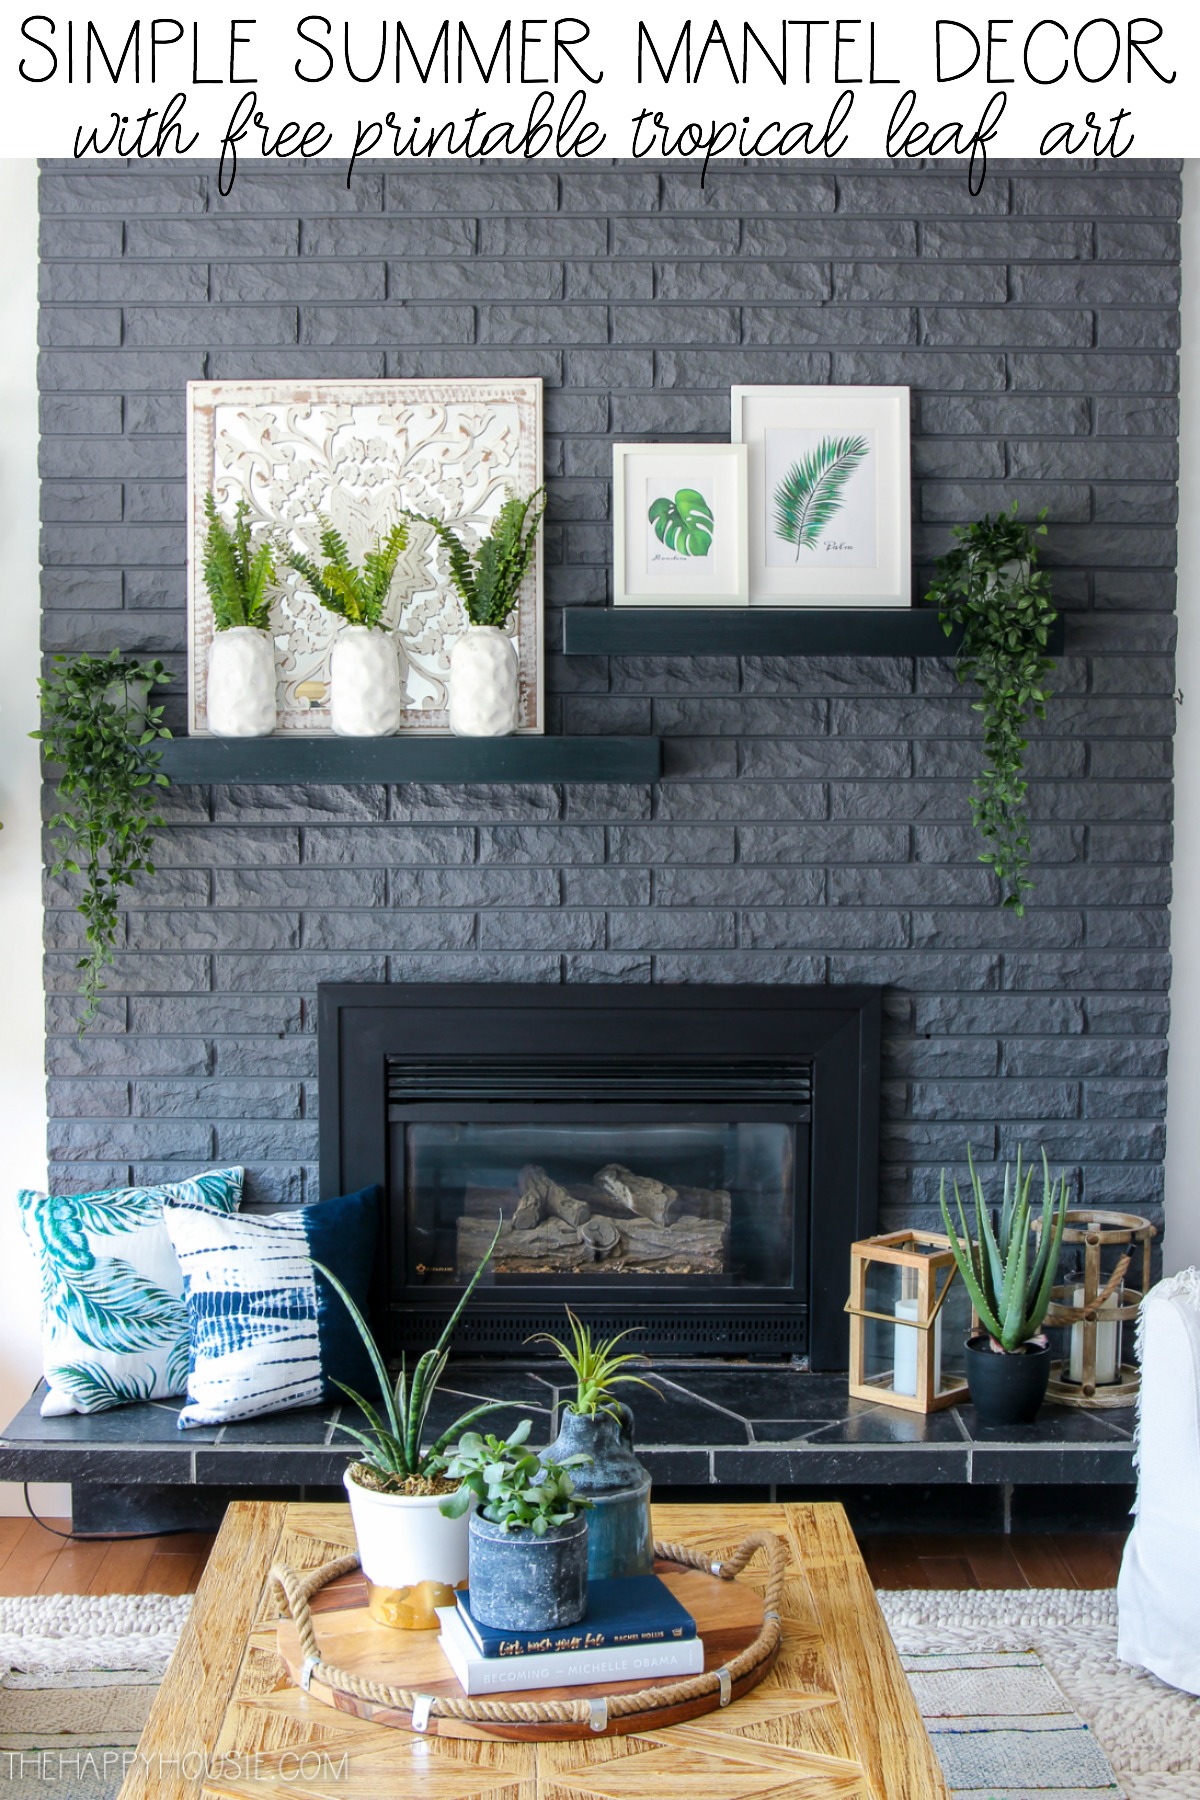 Simple summer mantel decor with free printable tropical leaf art graphic.